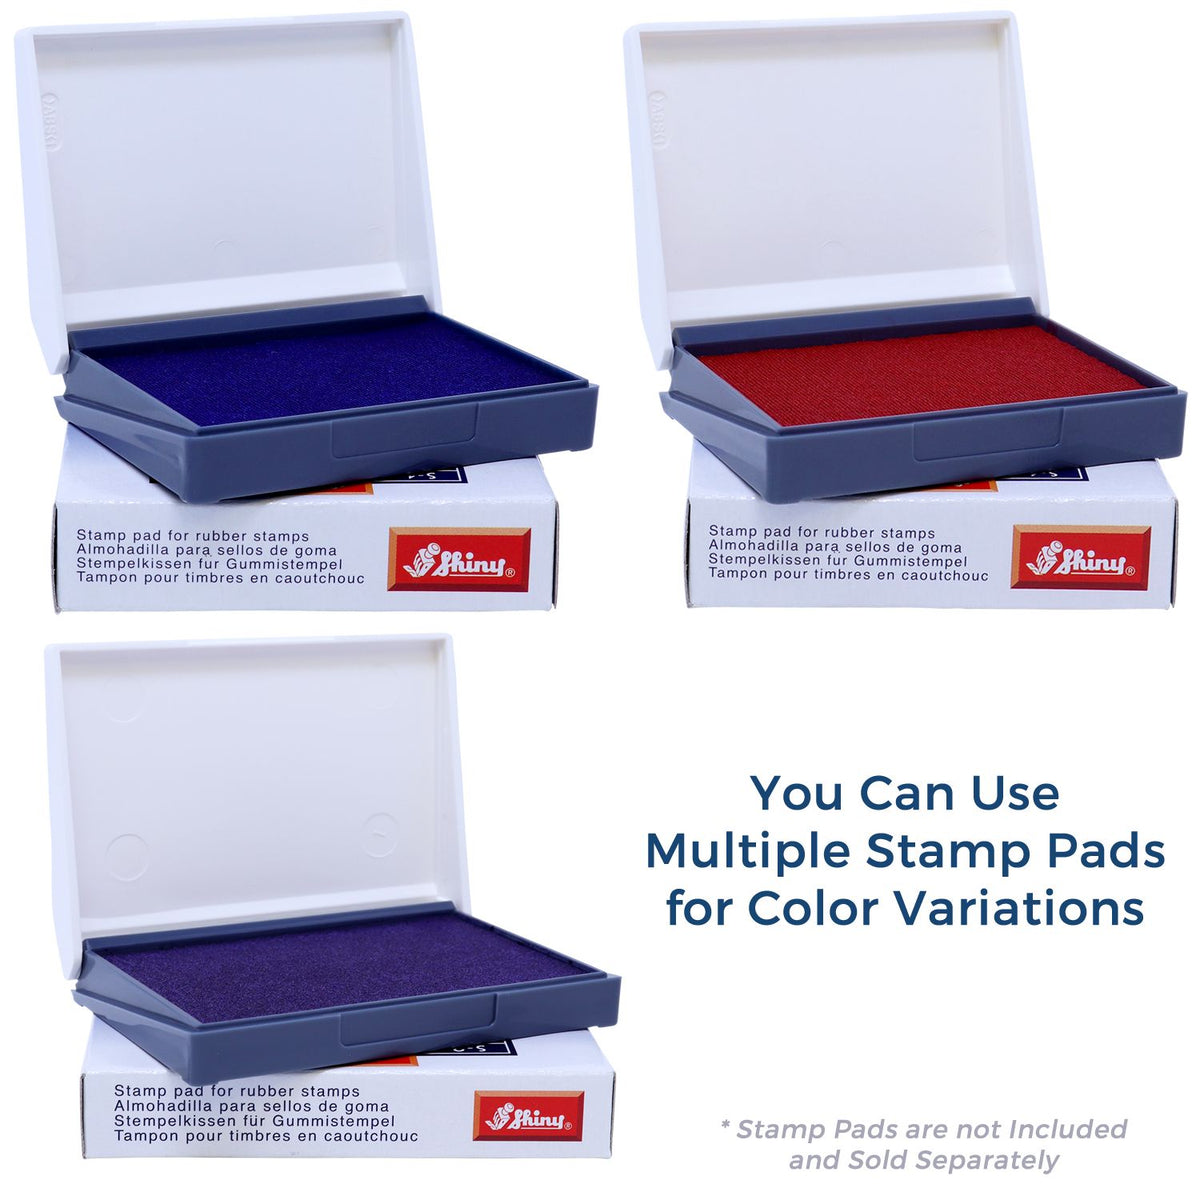 A picture showing the different ink colors or hues available for the Wooden Handle Puerto Rico Rectangular Notary Public Stamp product.